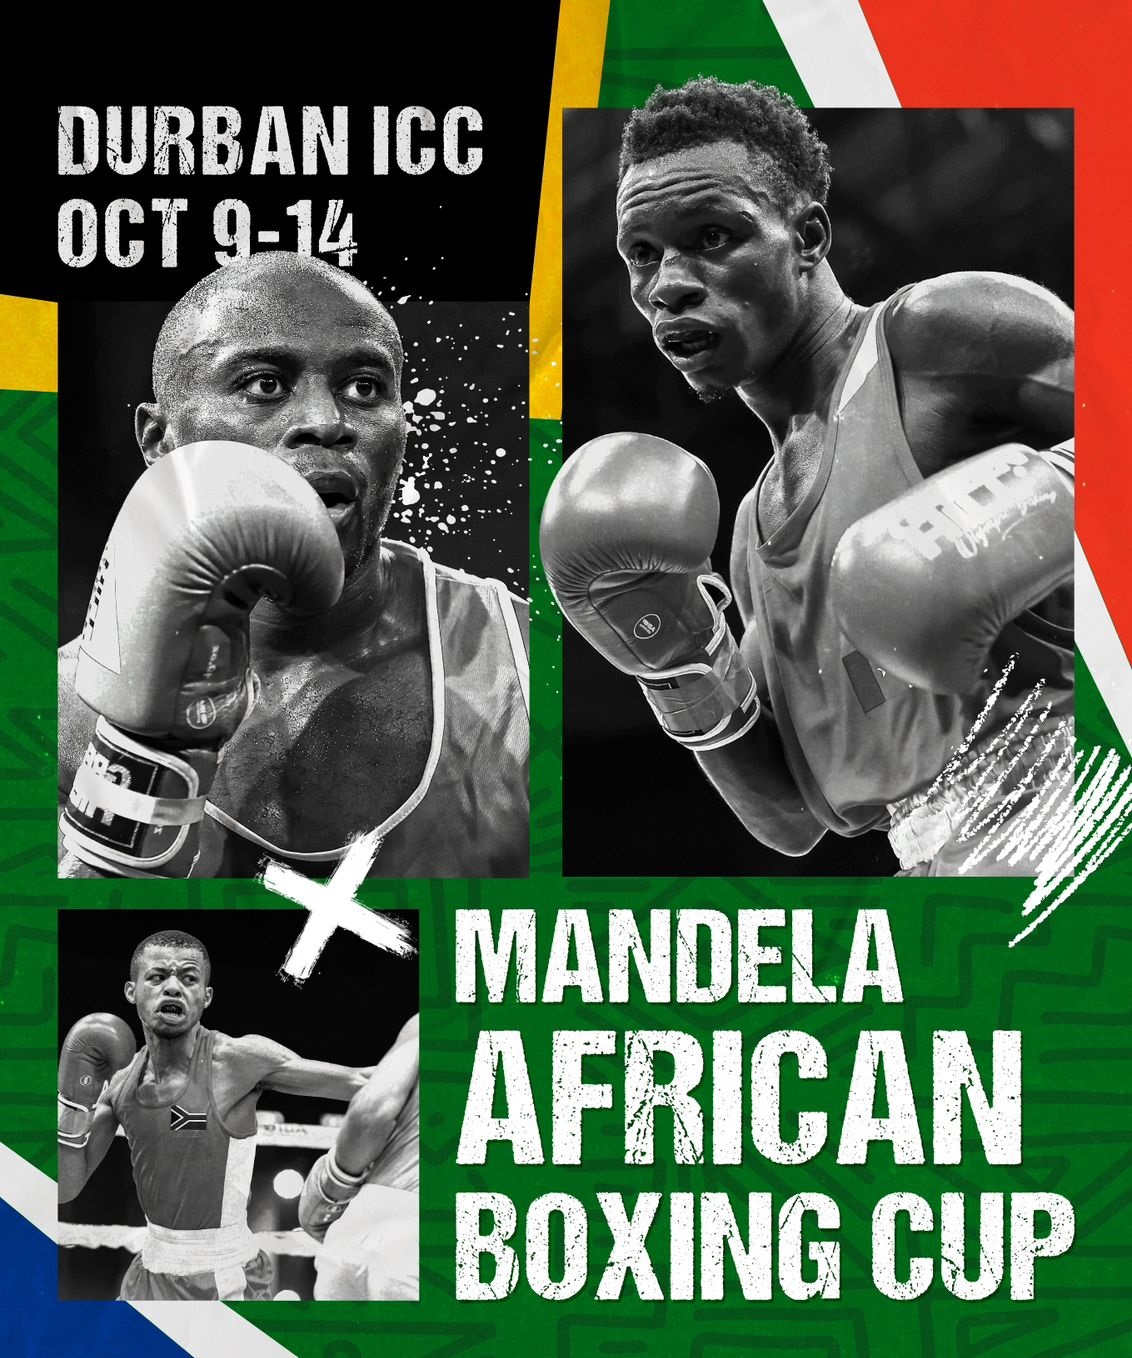 Registration open for the Mandela African Boxing Cup 2023 in Durban